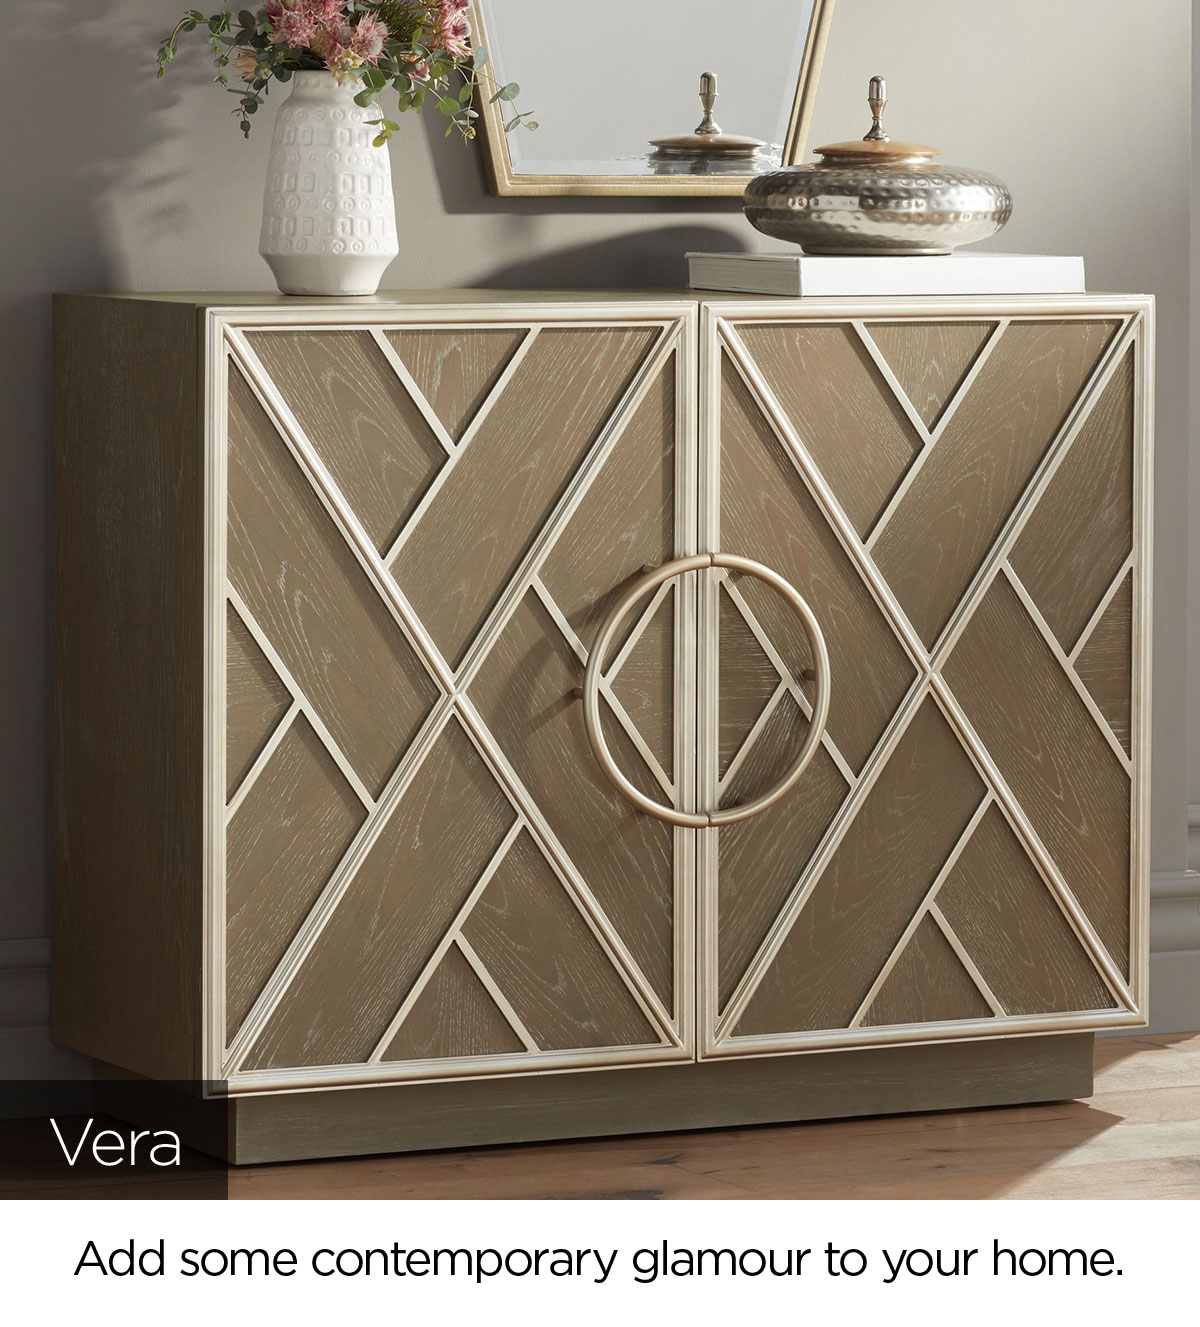 Vera - Add some contemporary glamour to your home.